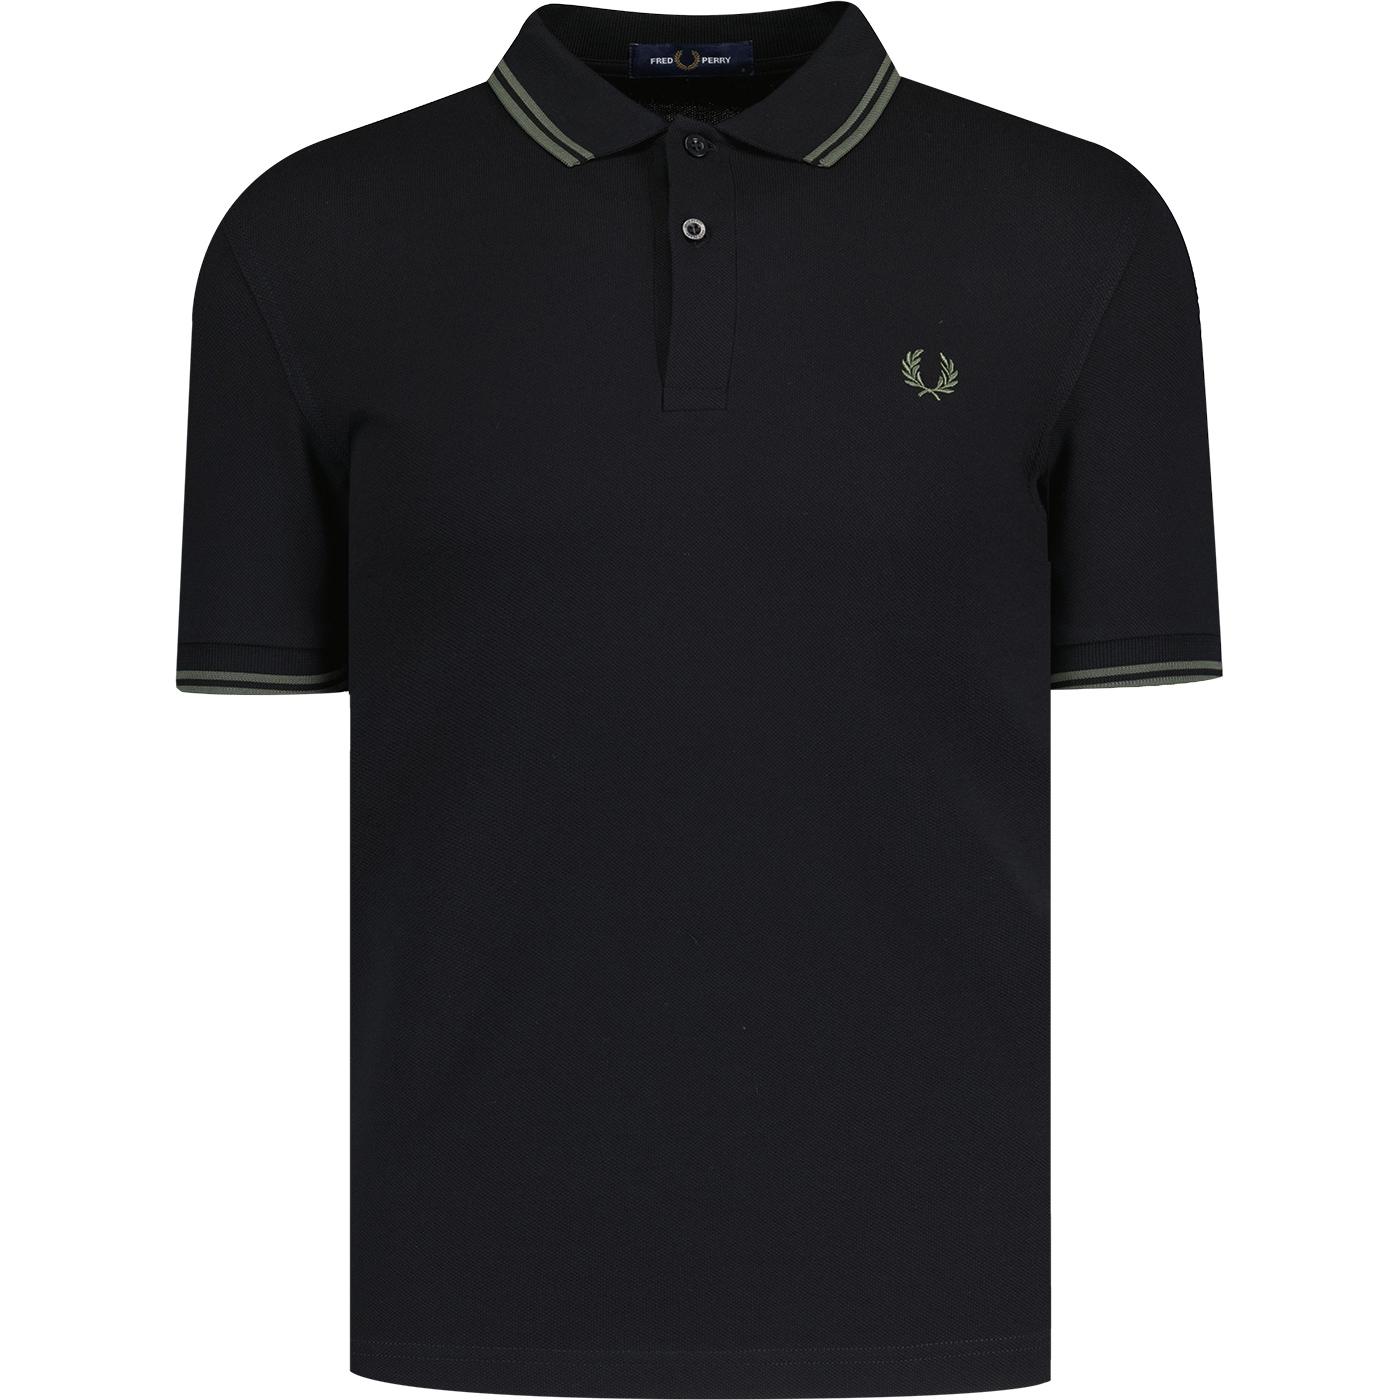 FRED PERRY M3600 Mod Twin Tipped Polo Shirt B/FG